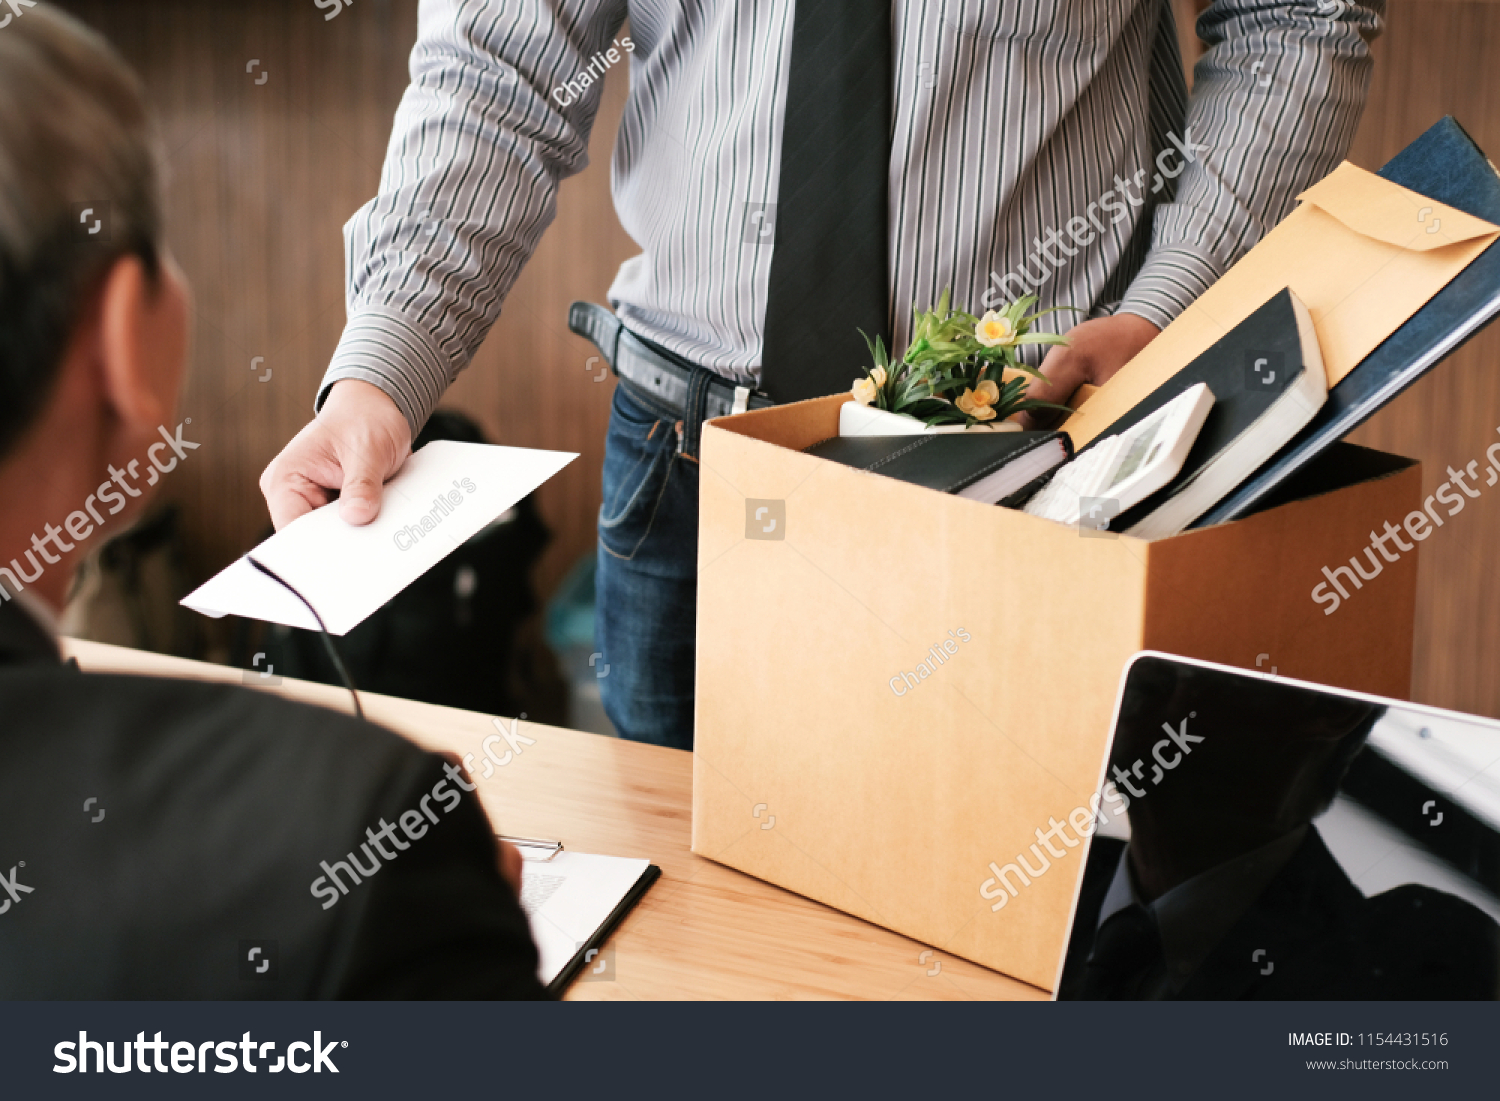 Business man sending resignation letter to boss and Holding Stuff Resign Depress or carrying cardboard box by desk in office #1154431516